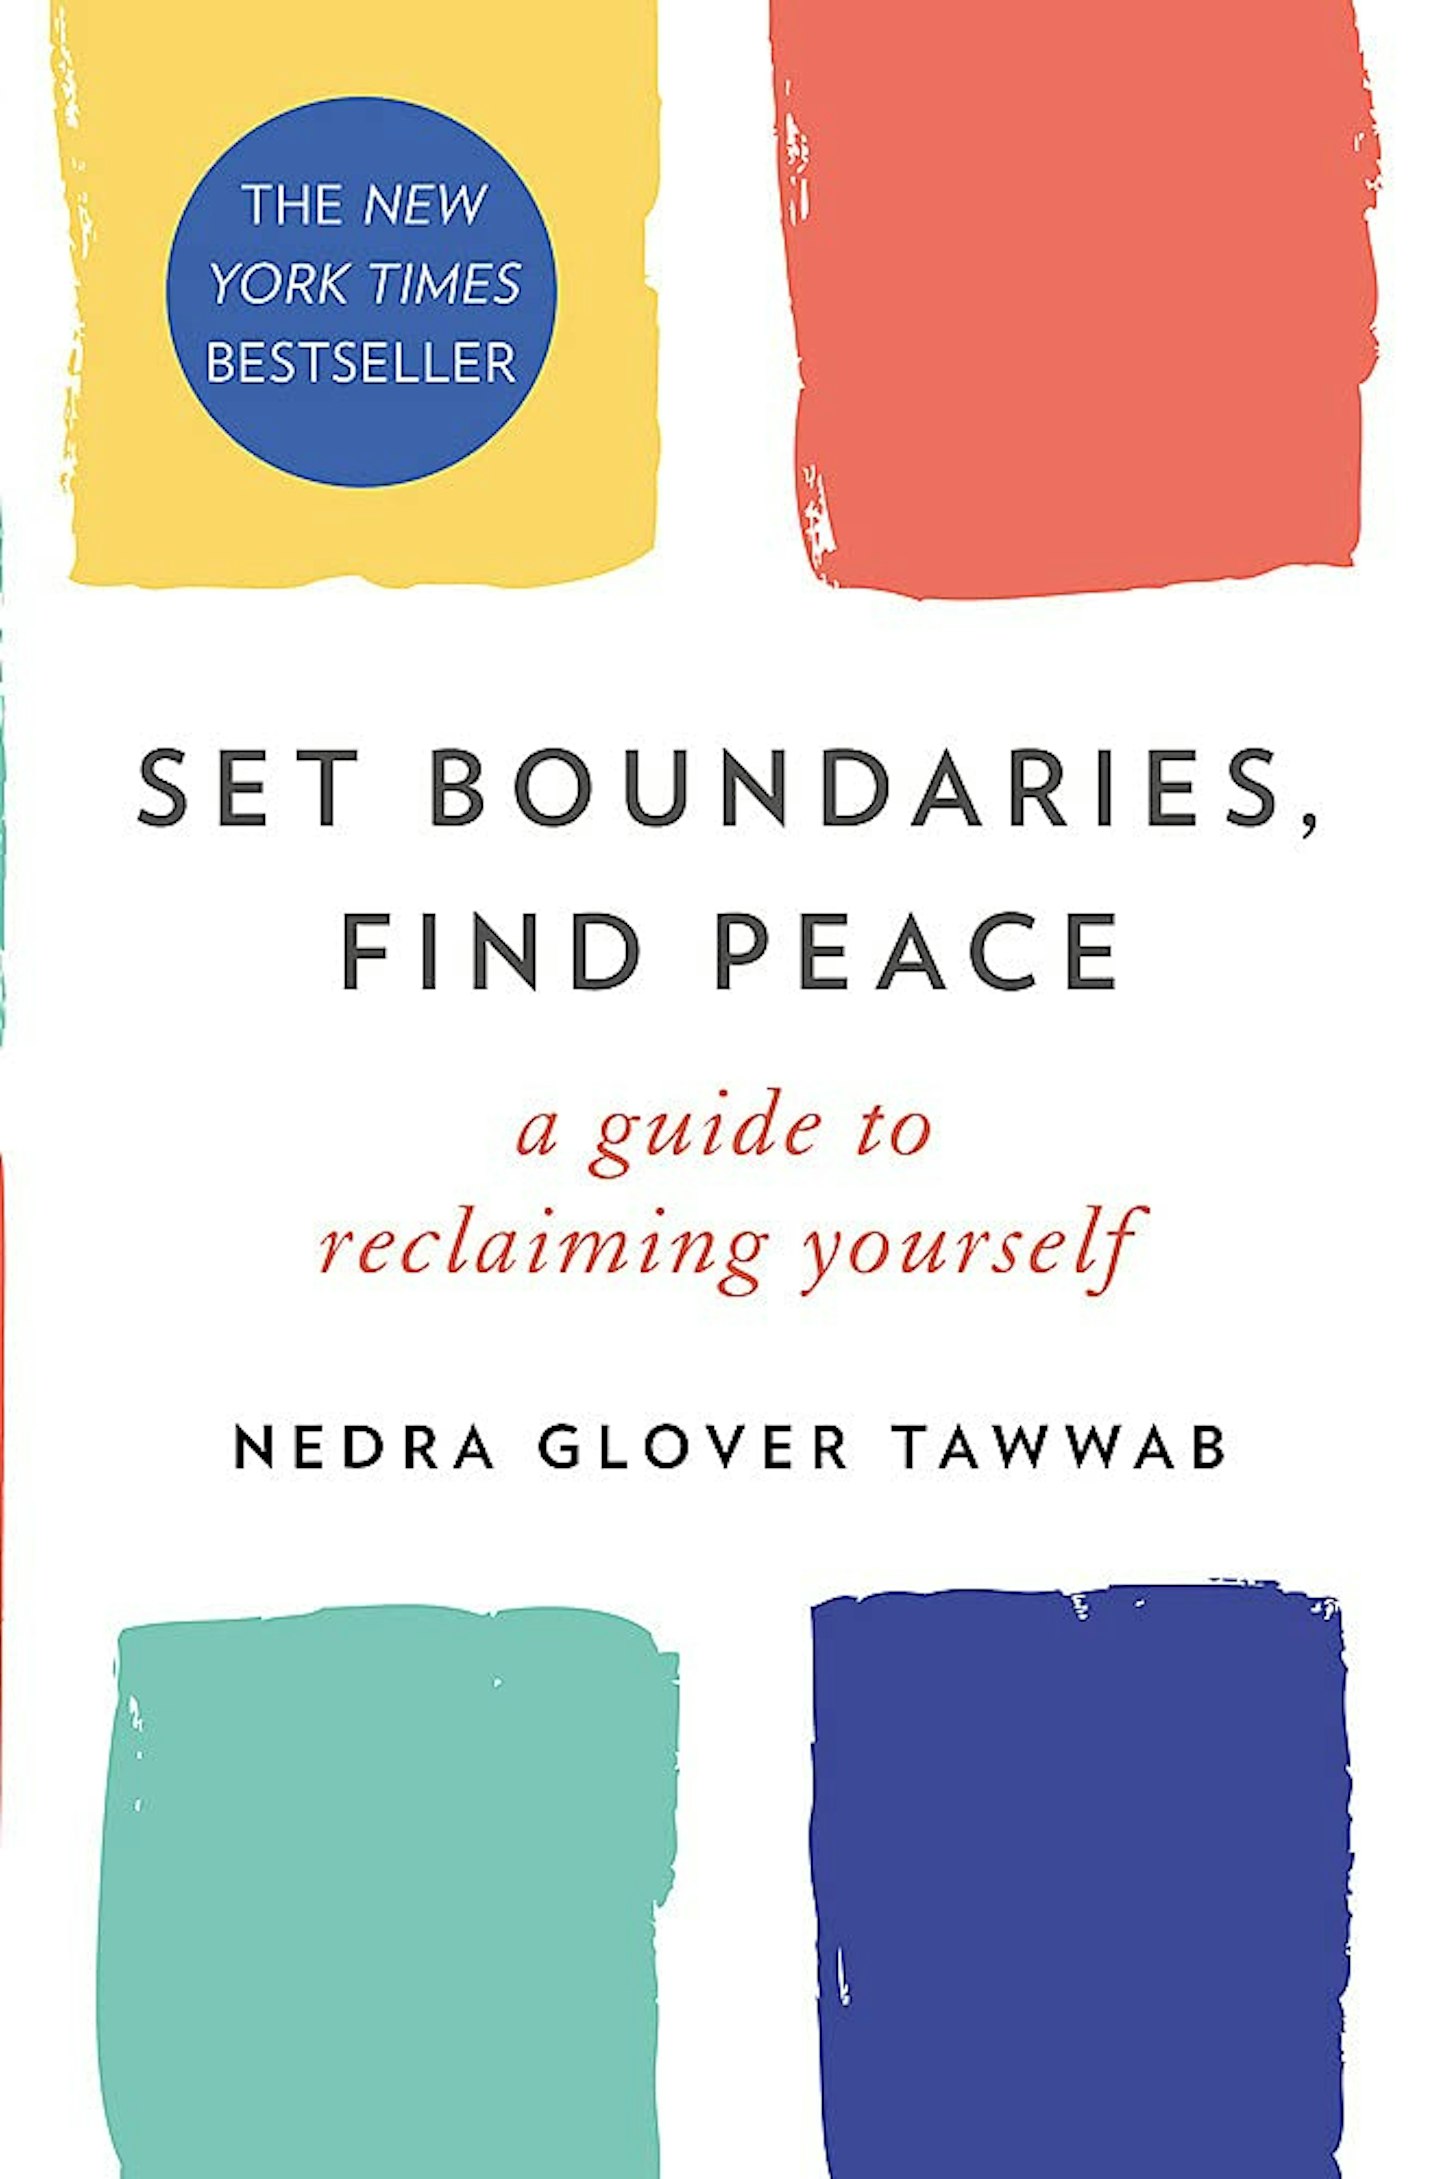 Set Boundaries, Find Peace : A Guide To Reclaiming Yourself by Nedra Glover Tawwab